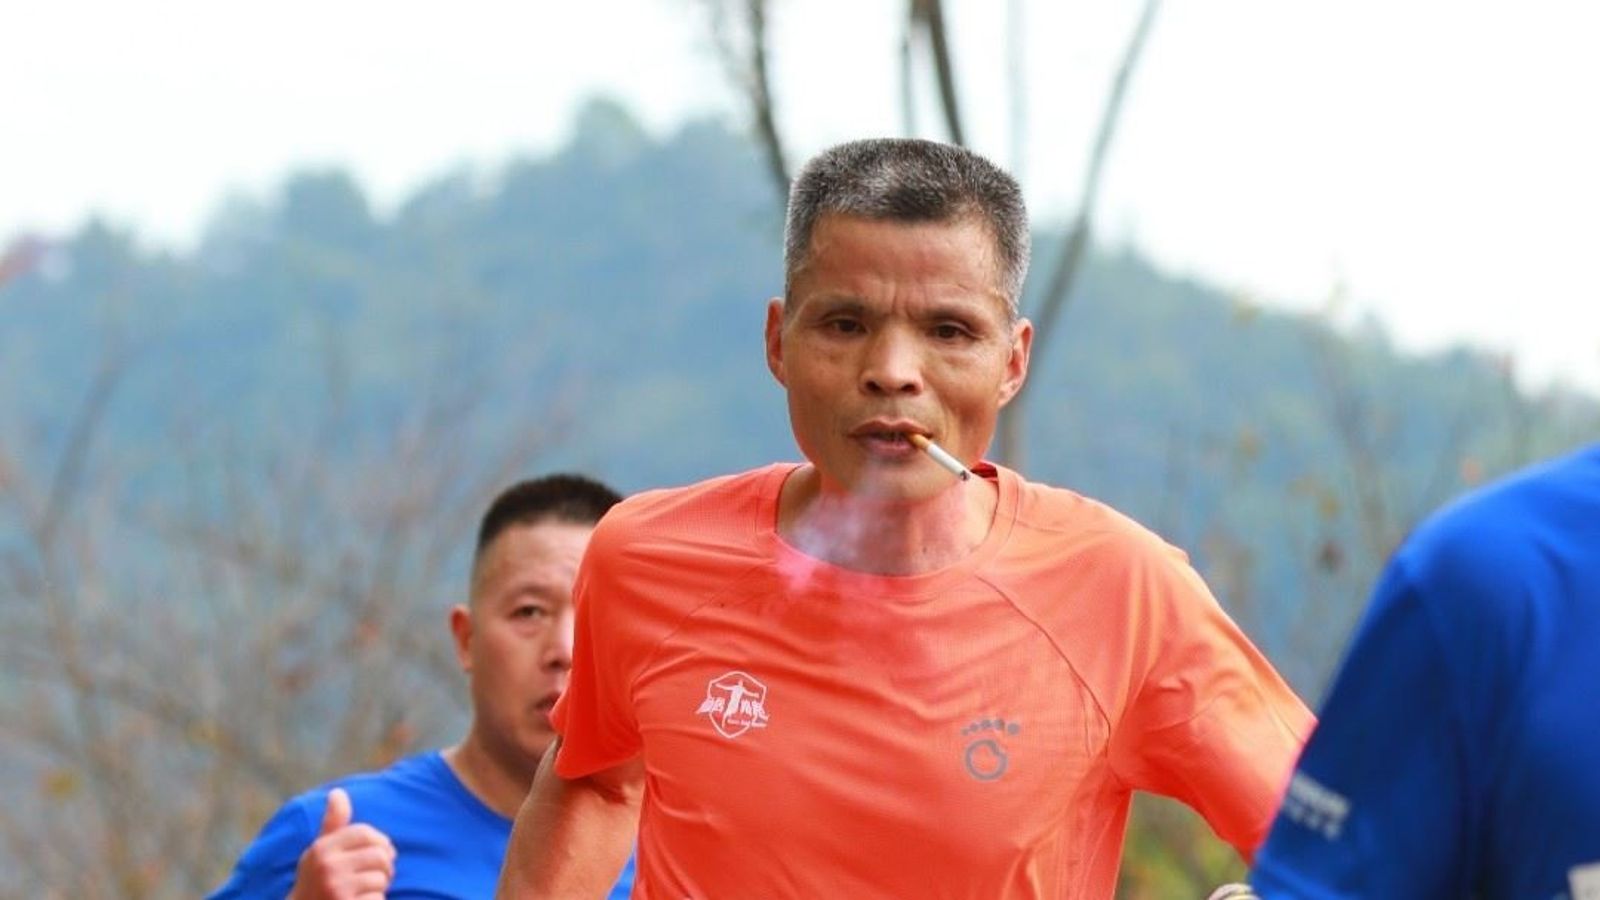 Chinese chain-smoking marathon runner completes 26 miles in less than three and a half hours